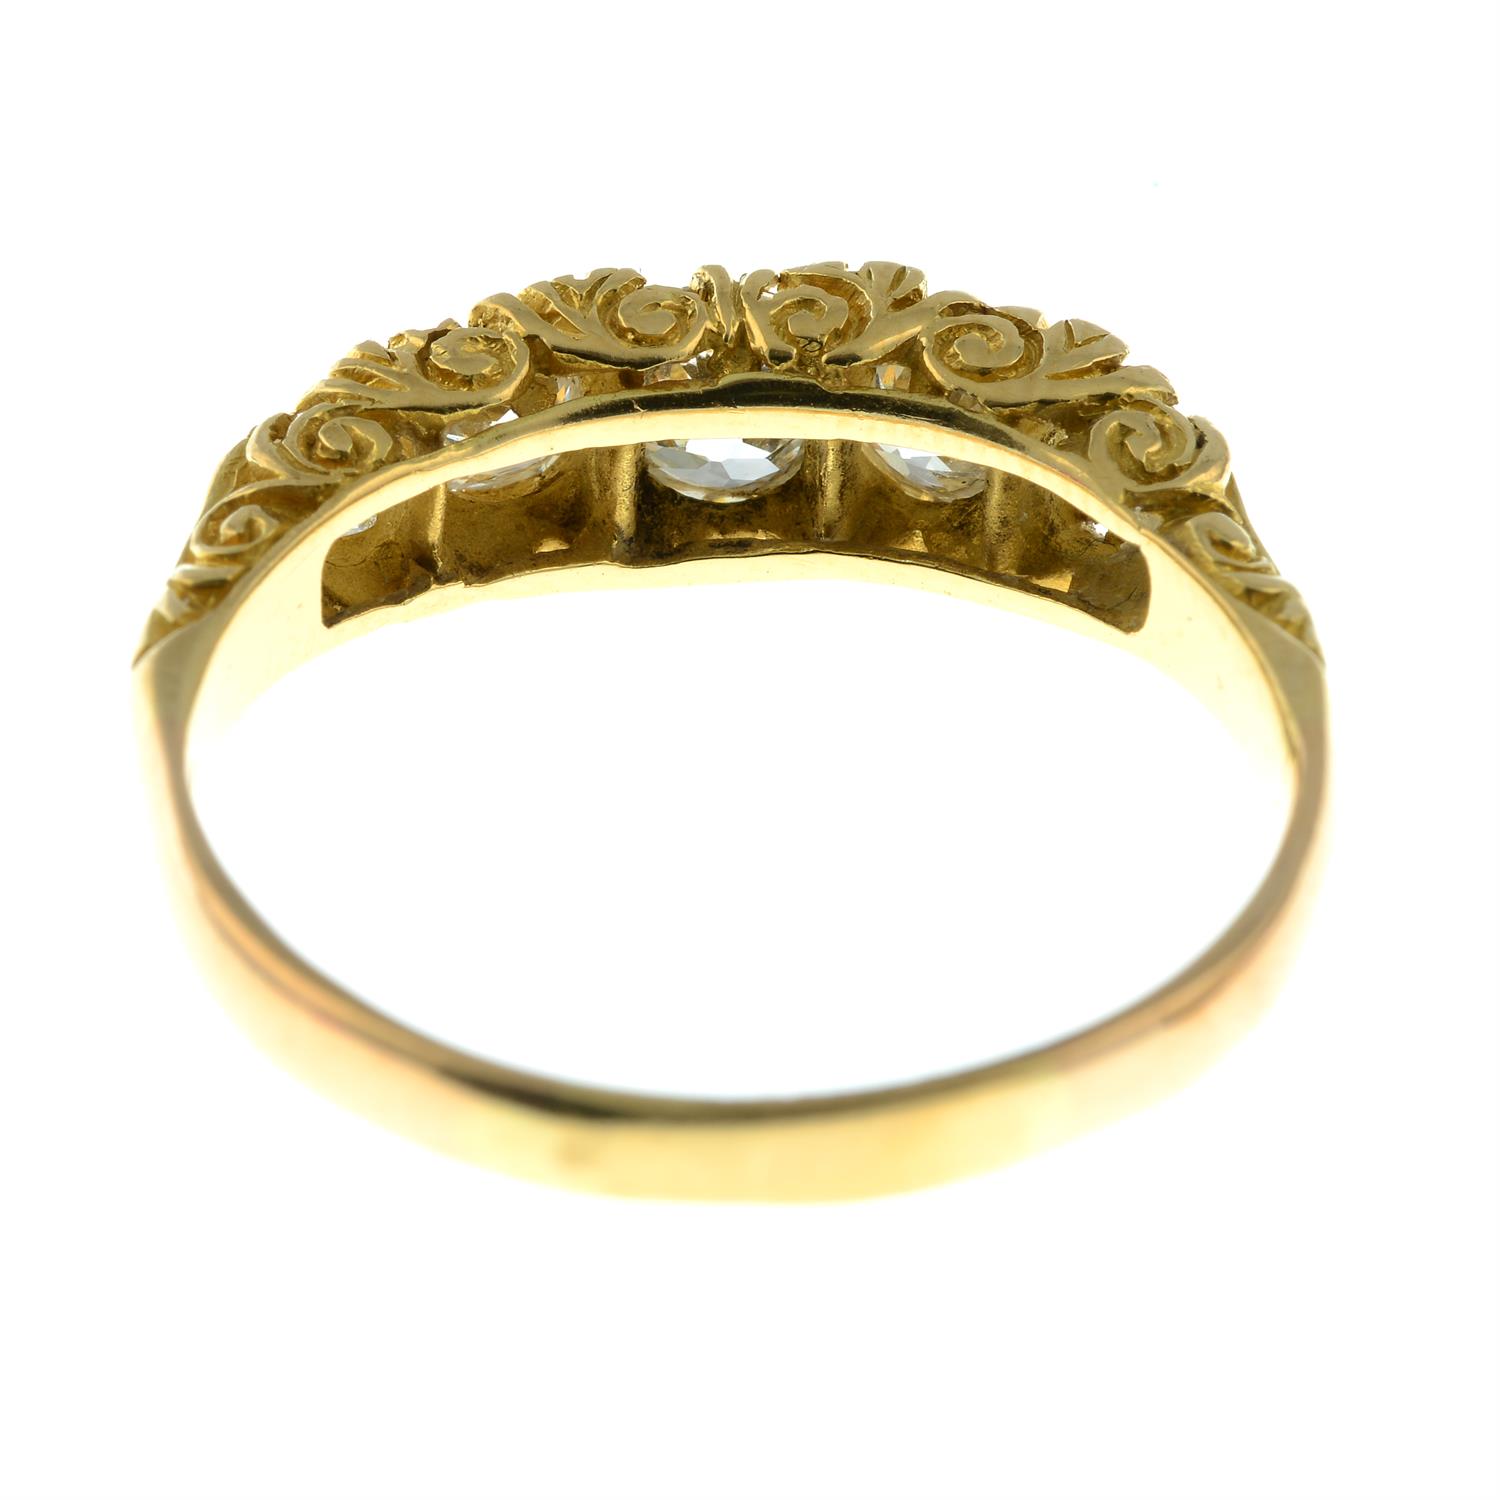 An early 20th century 18ct gold graduated old-cut diamond five-stone ring. - Image 4 of 5